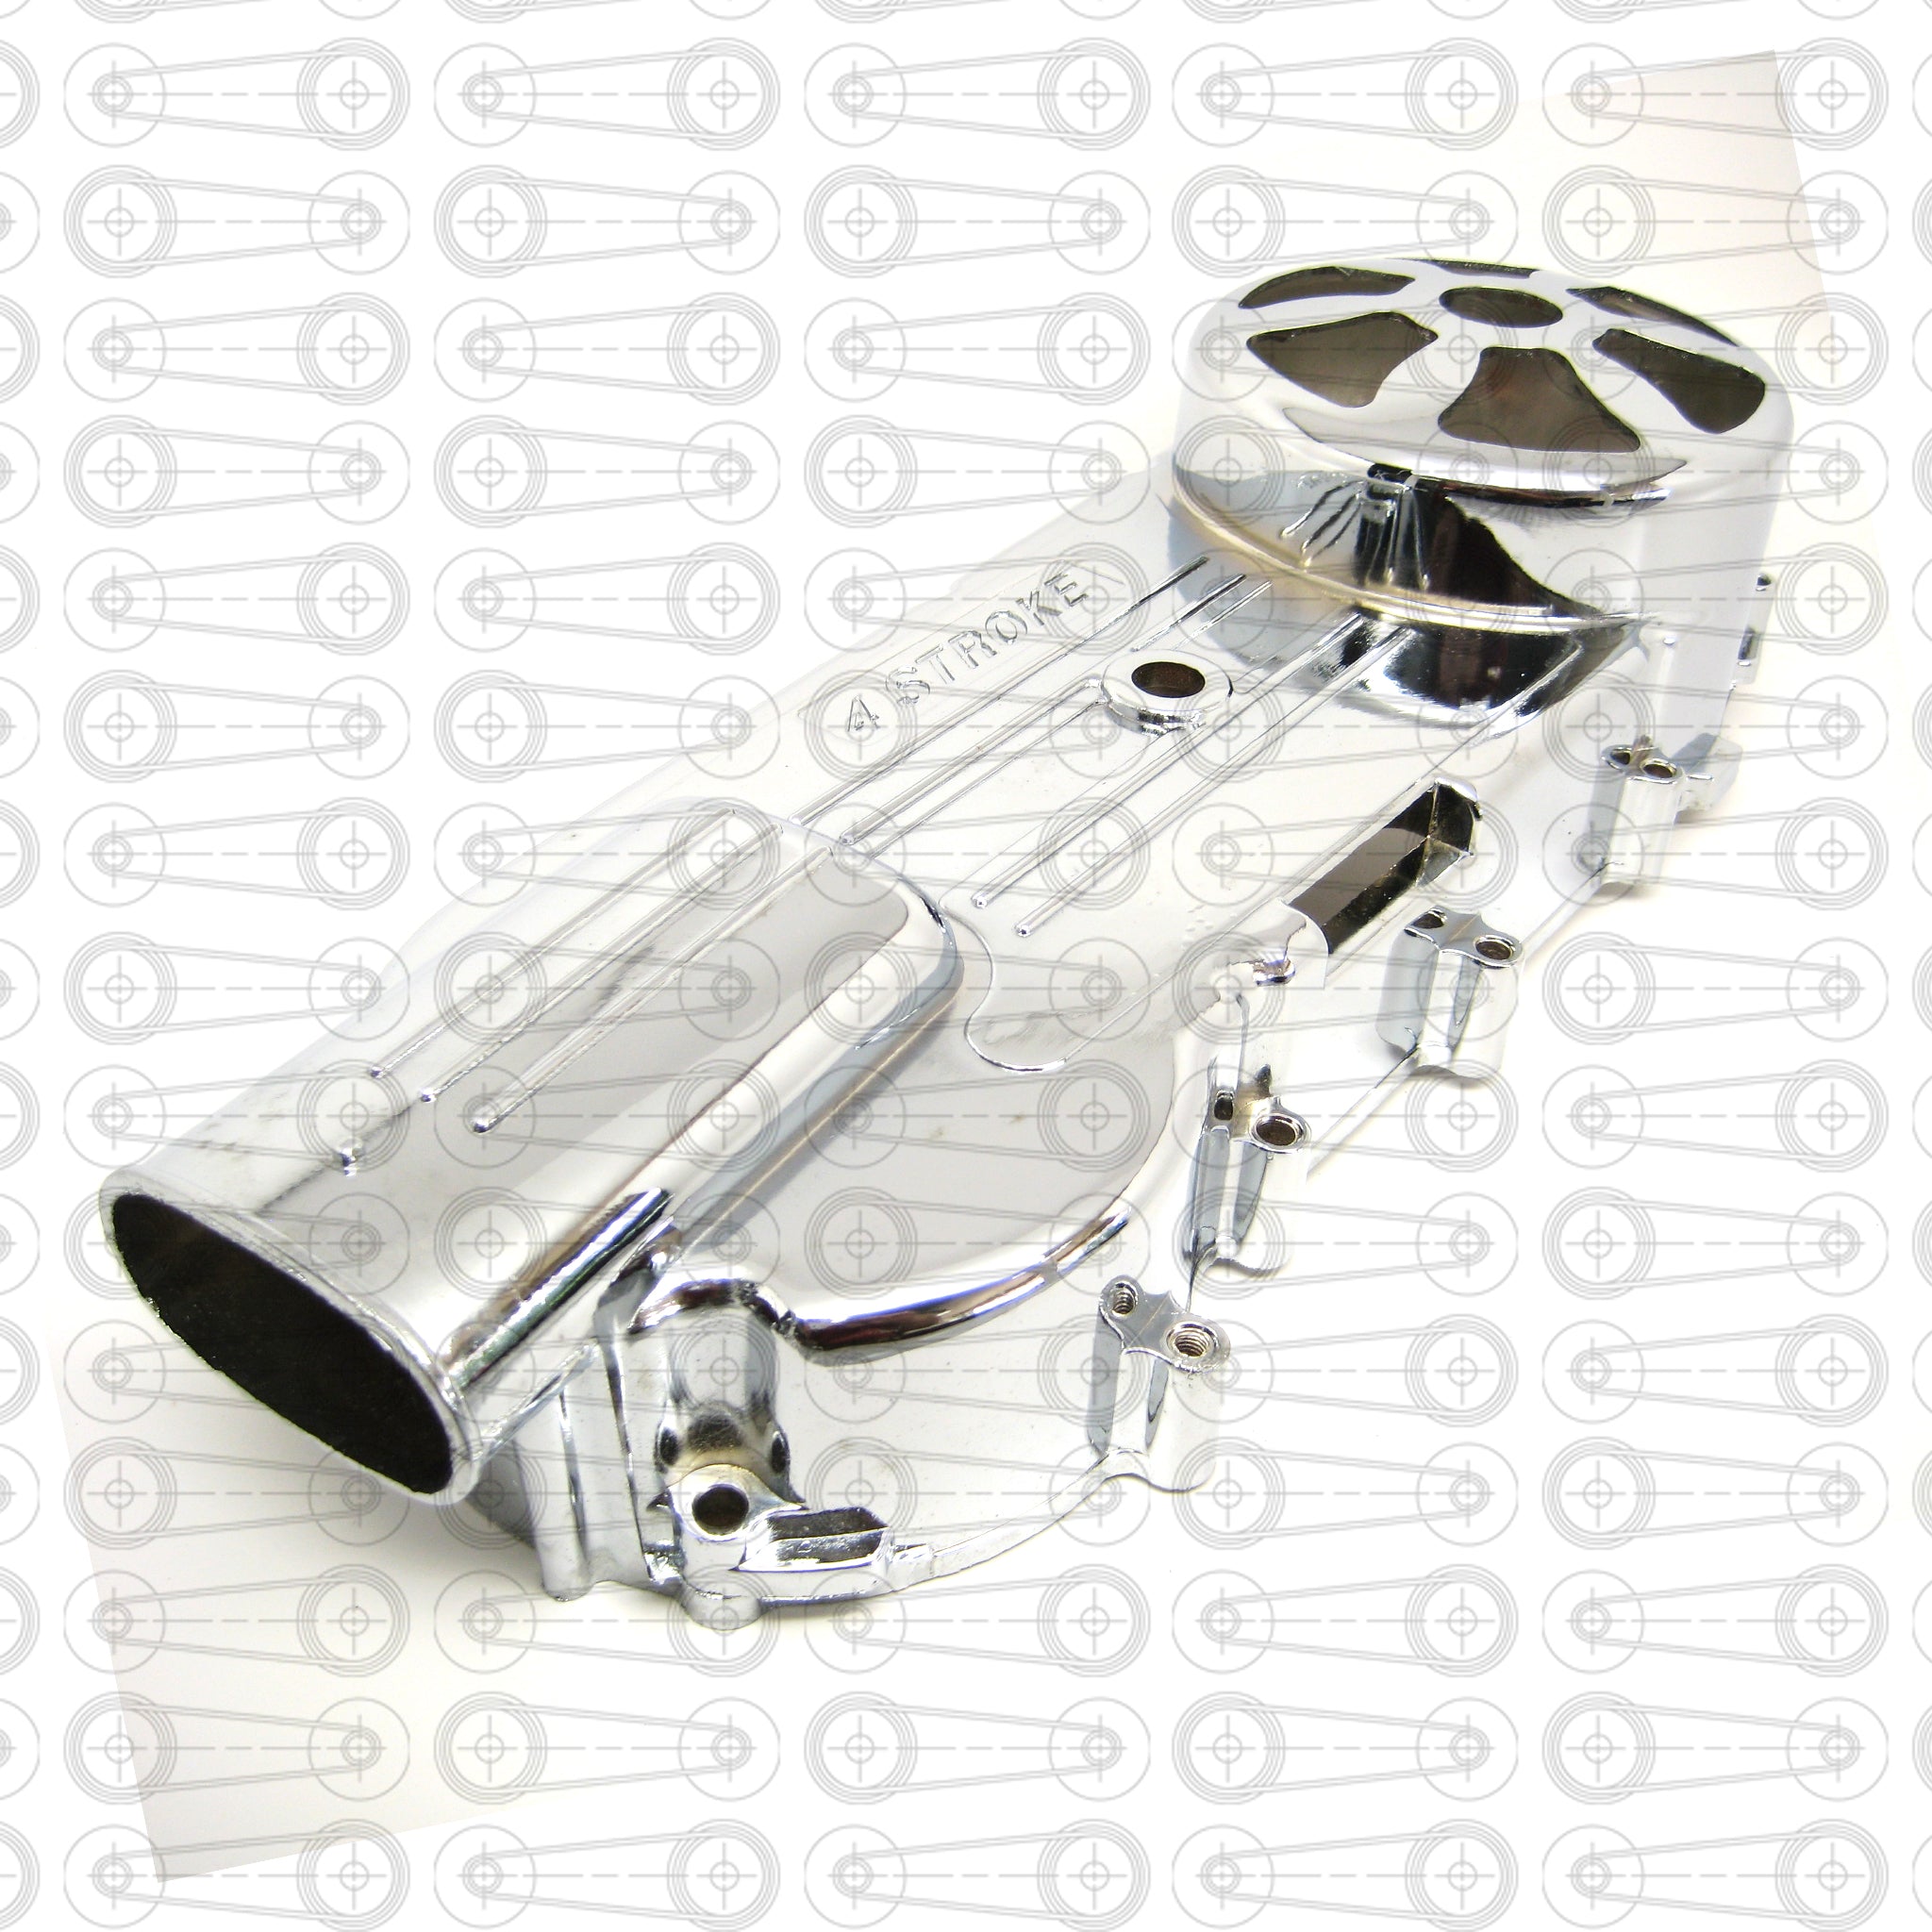 CHROME - VENTED LONG CASE CVT COVER (GY6)